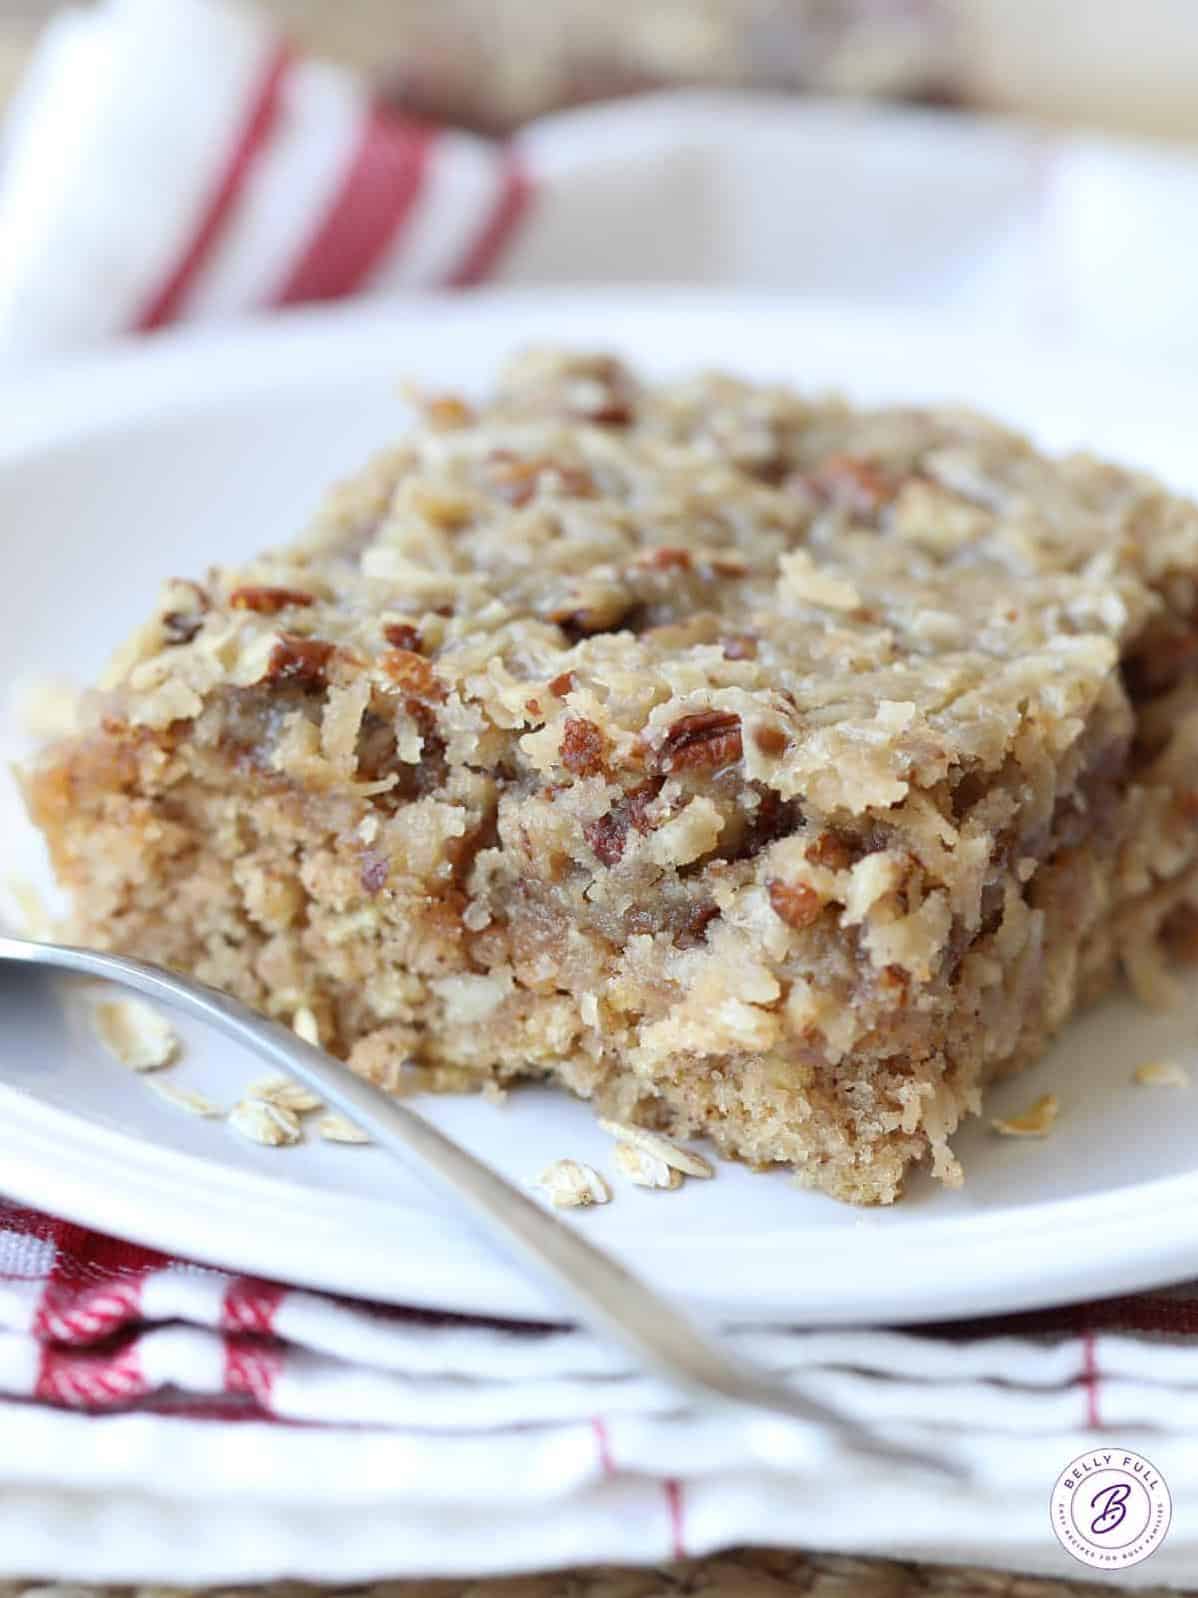  With only a few simple ingredients, you can create these tasty oatmeal cakes in no time!